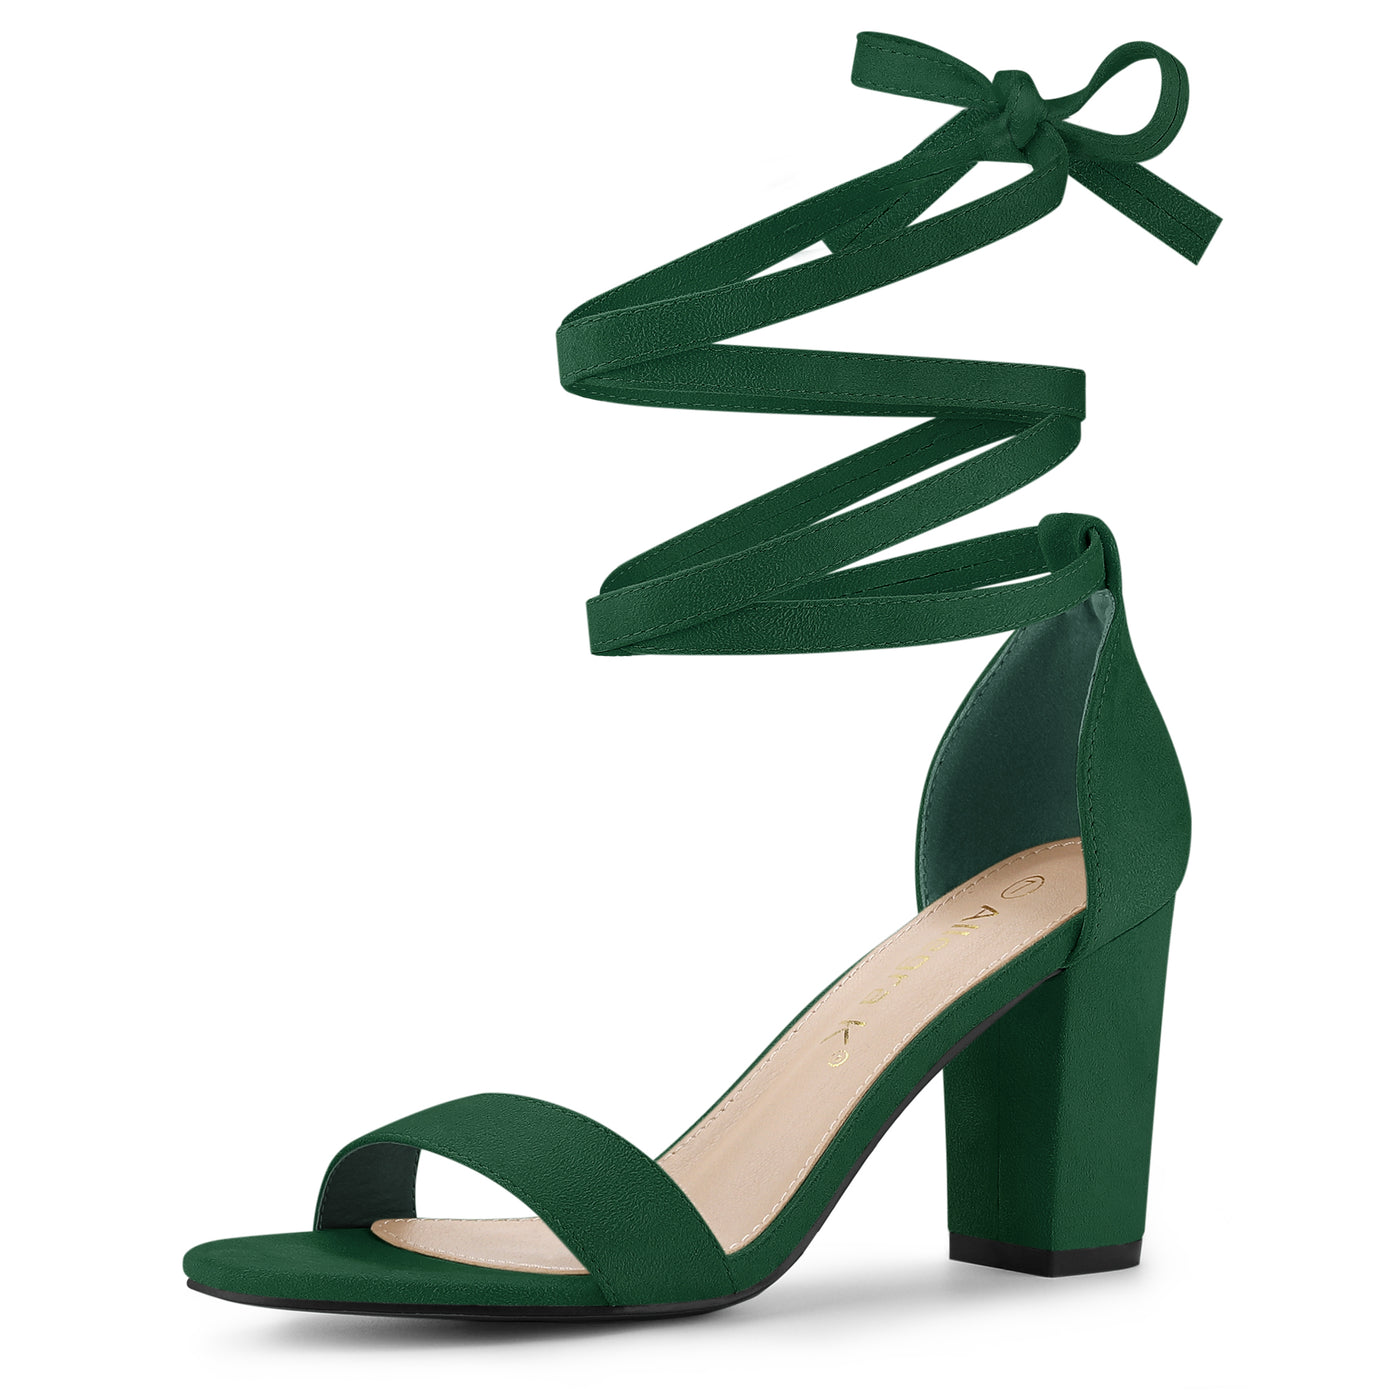 Allegra K Lace Up and Ankle Strap Chunky Heel Sandals